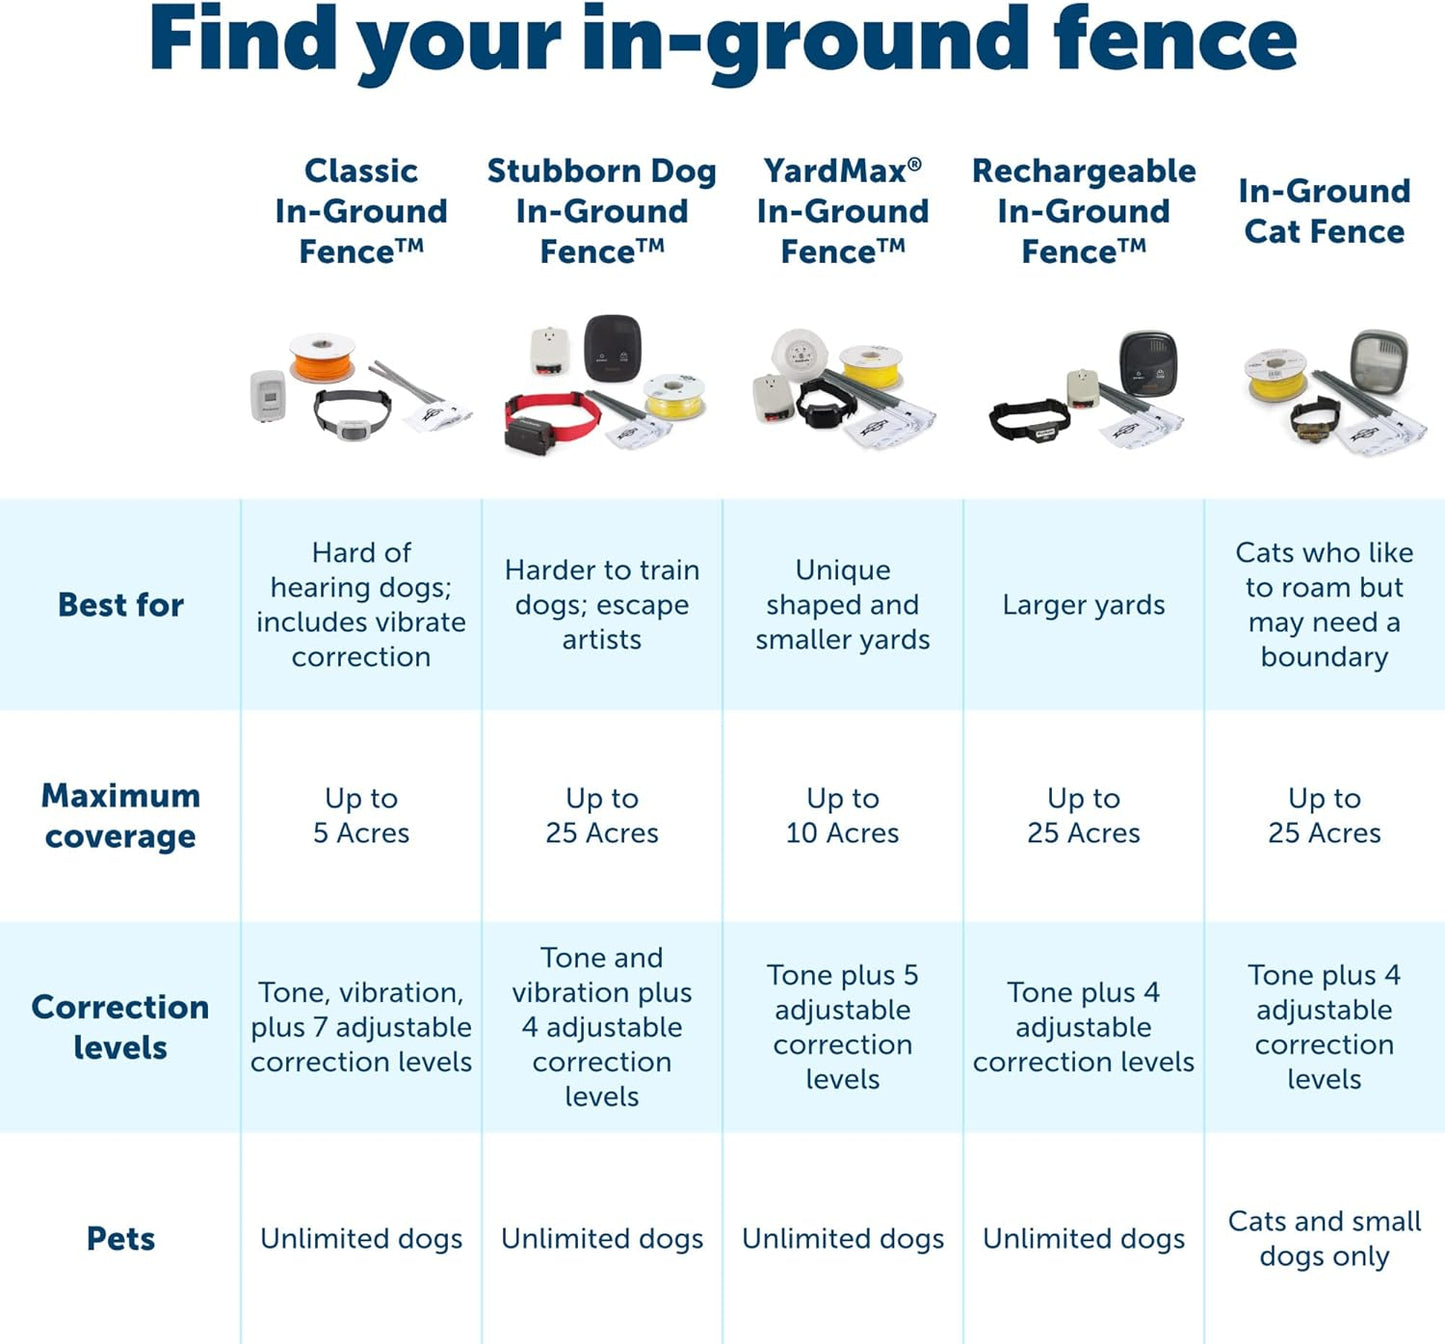 PetSafe\u202FBasic In-Ground Fence\u202FBattery-Operated Receiver Collar\u202Ffor Dogs & Cats, Lightweight, Waterproof, From The Parent Company of Invisible Fence Brand, 4 Levels of Static Correction, Pets 8\u202Flb\u202F& Up